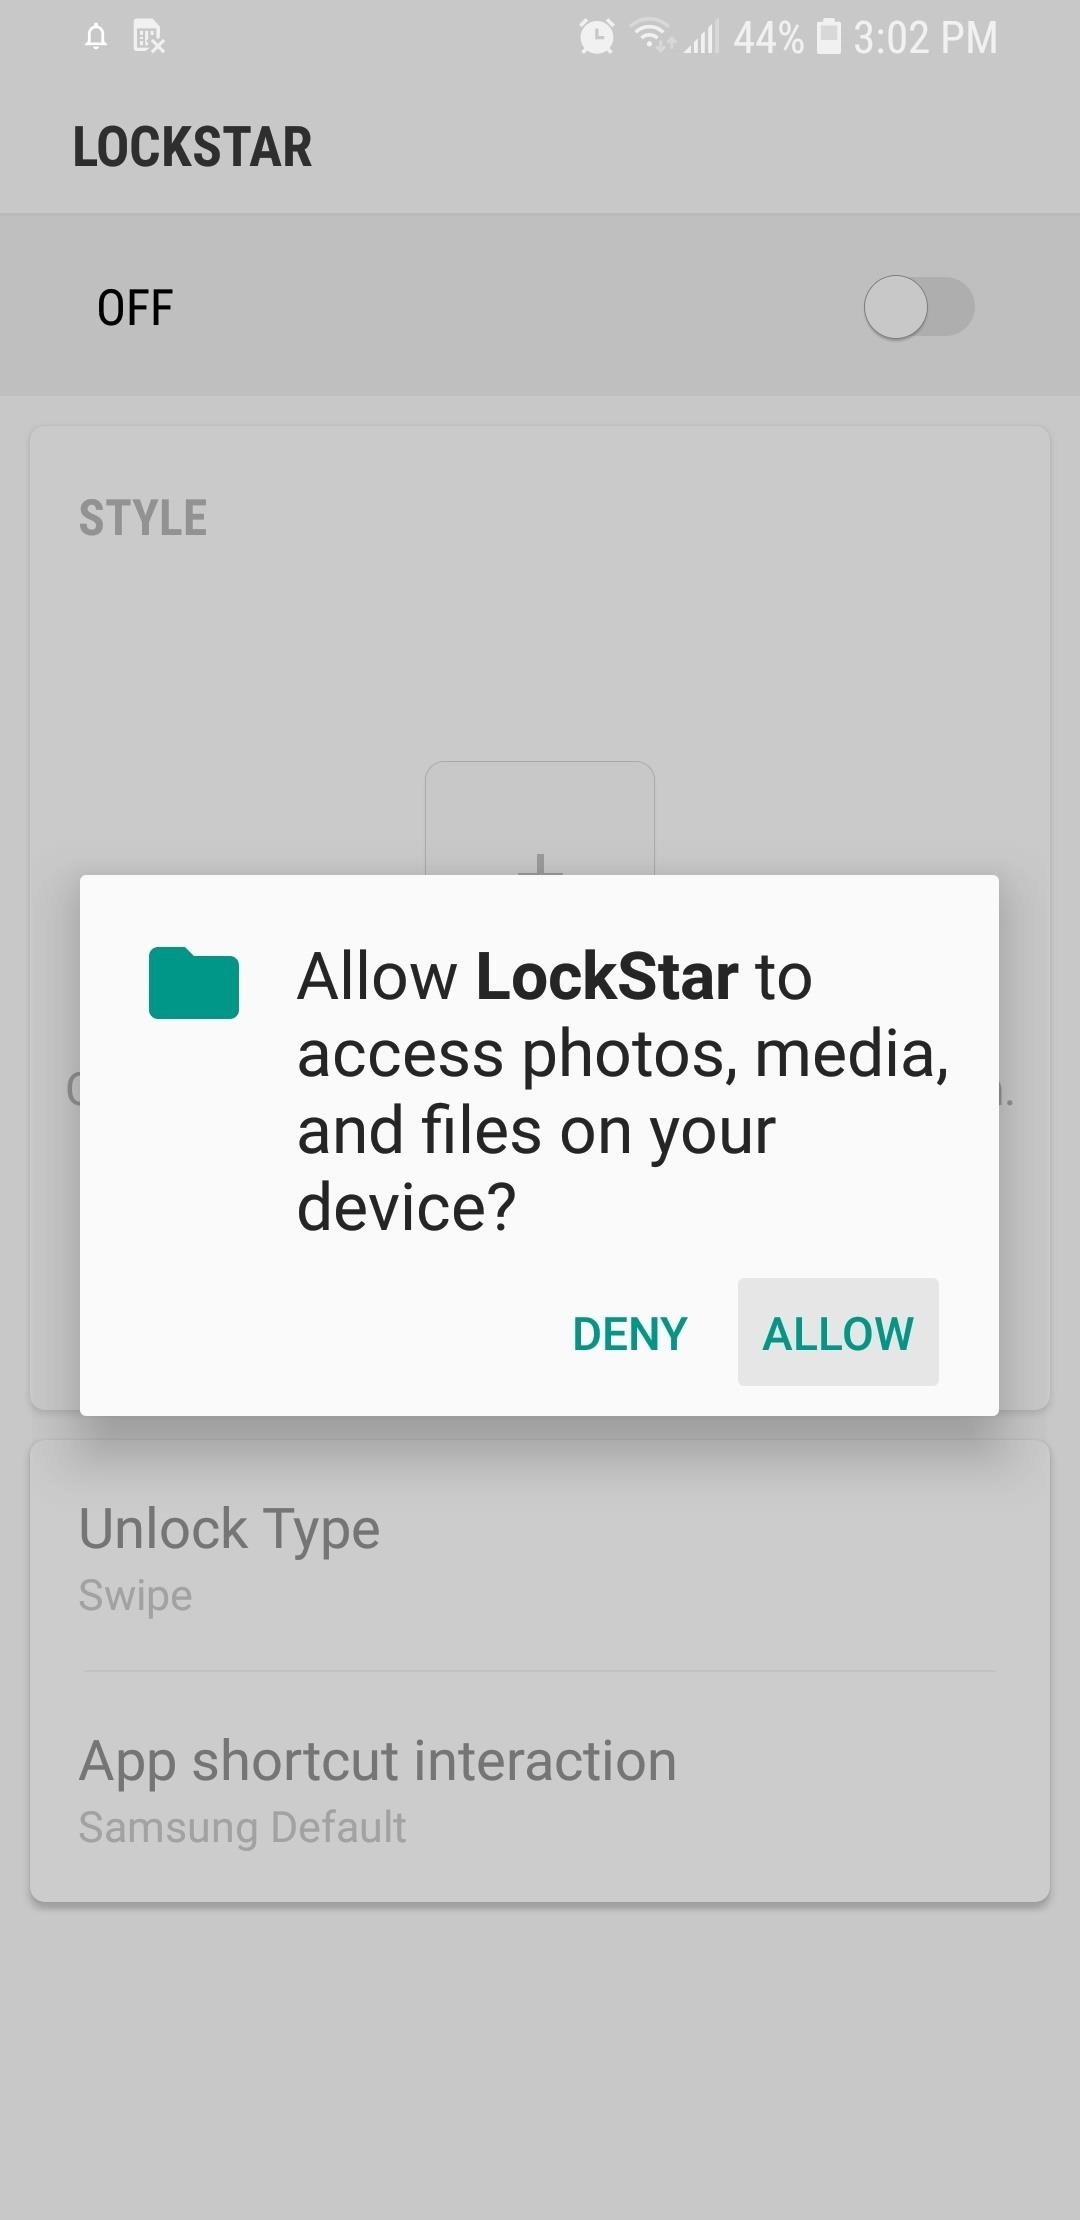 How to Install Samsung's Good Lock App to Customize Your Galaxy